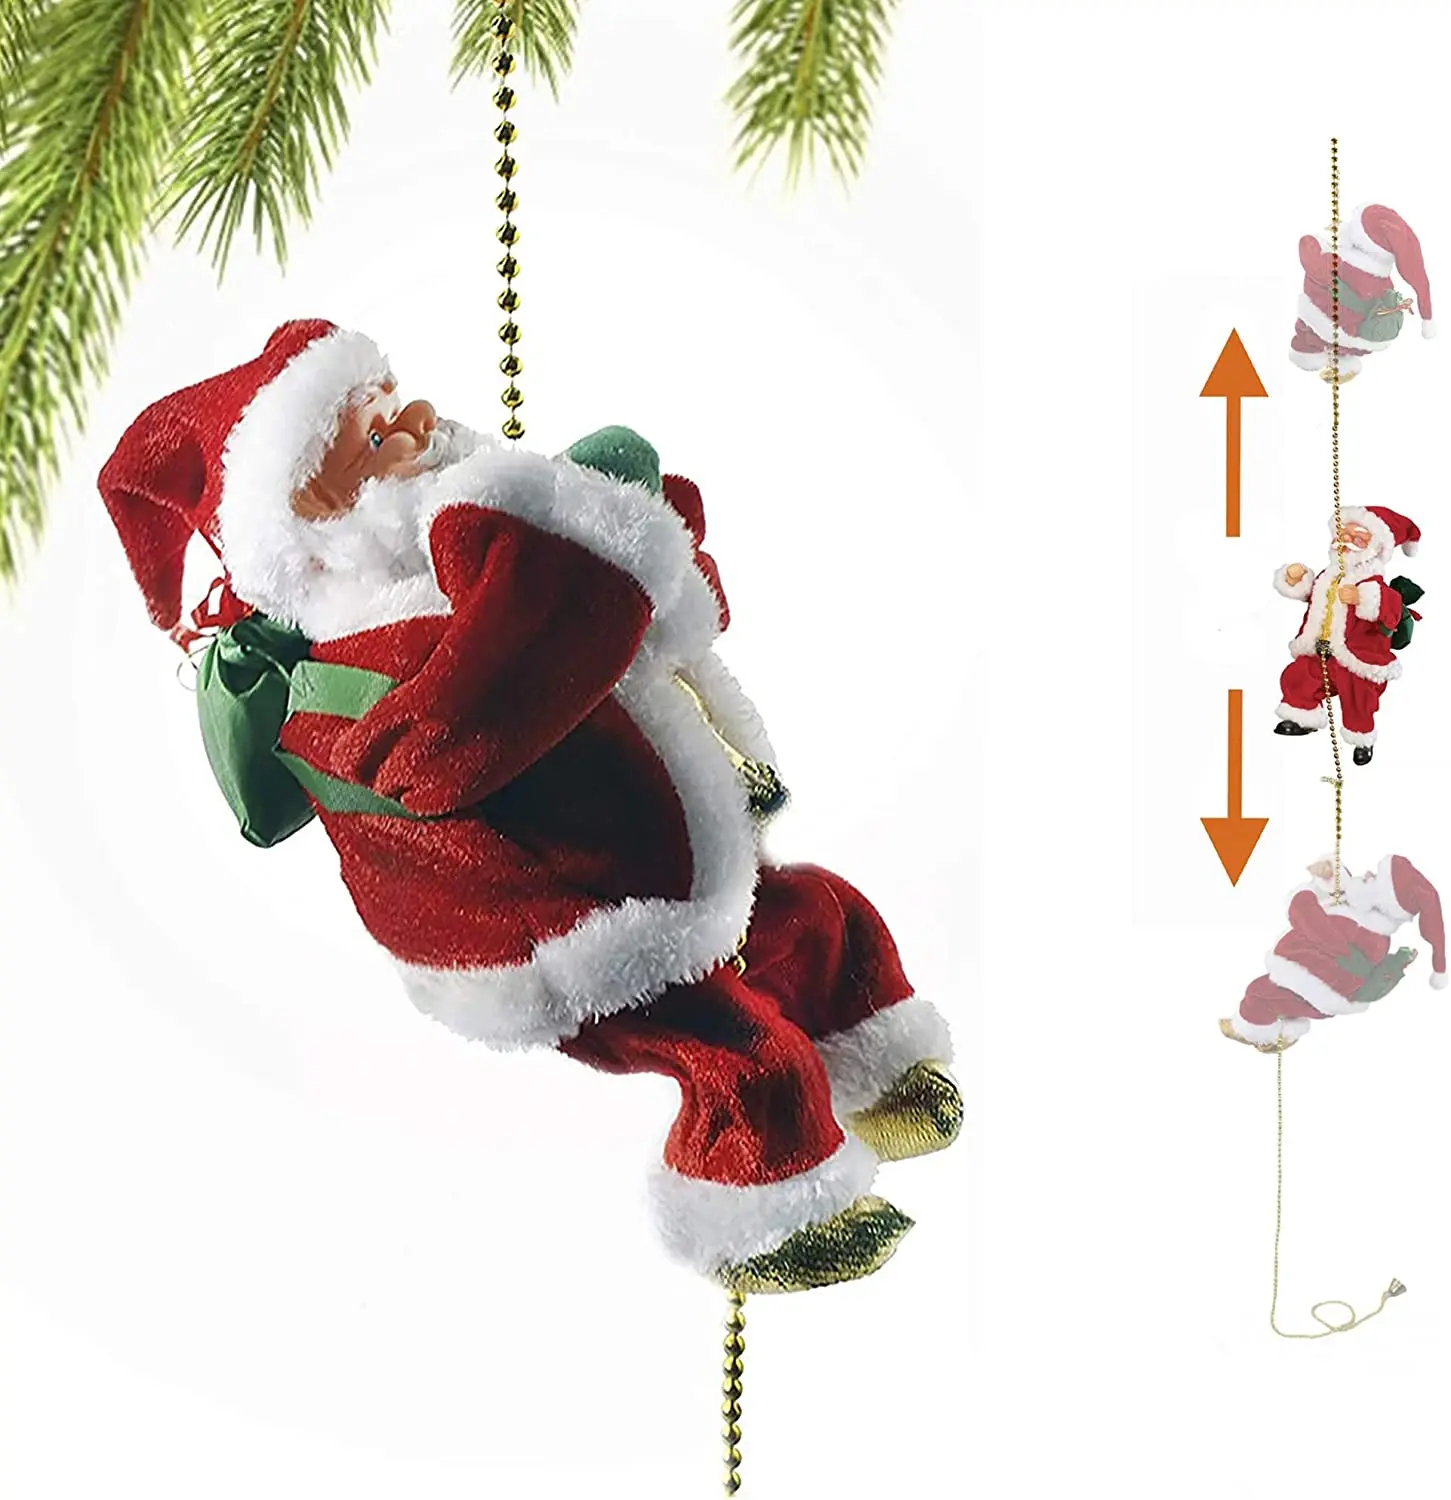 Electric Climbing Ladder Santa Claus Christmas Figurine Ornament Climb Up The Beads and Go Down Repeatedly Kids Toy Gifts New